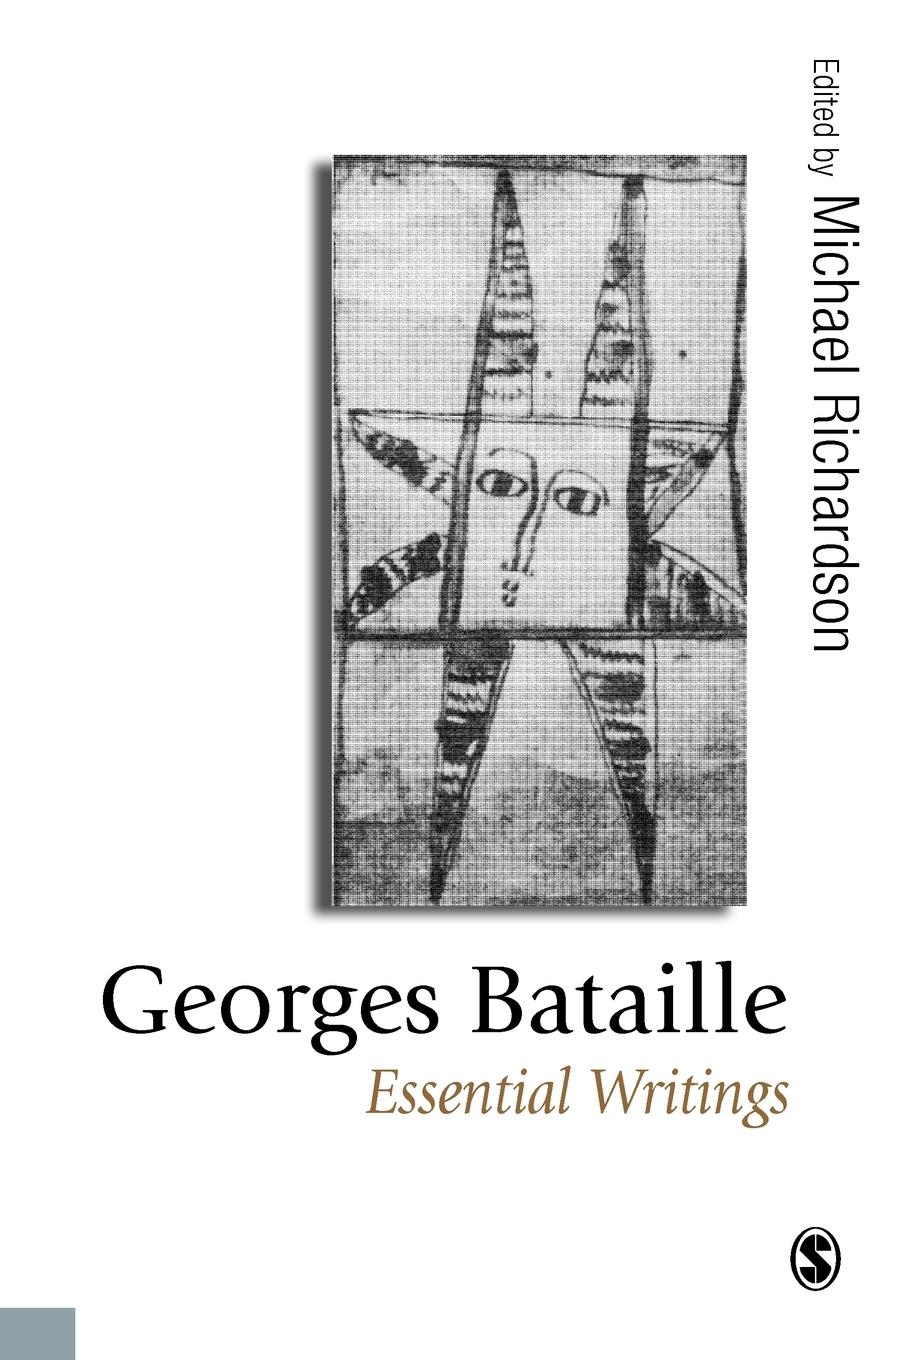 Georges Bataille - Richardson, Michael Bataille, Georges